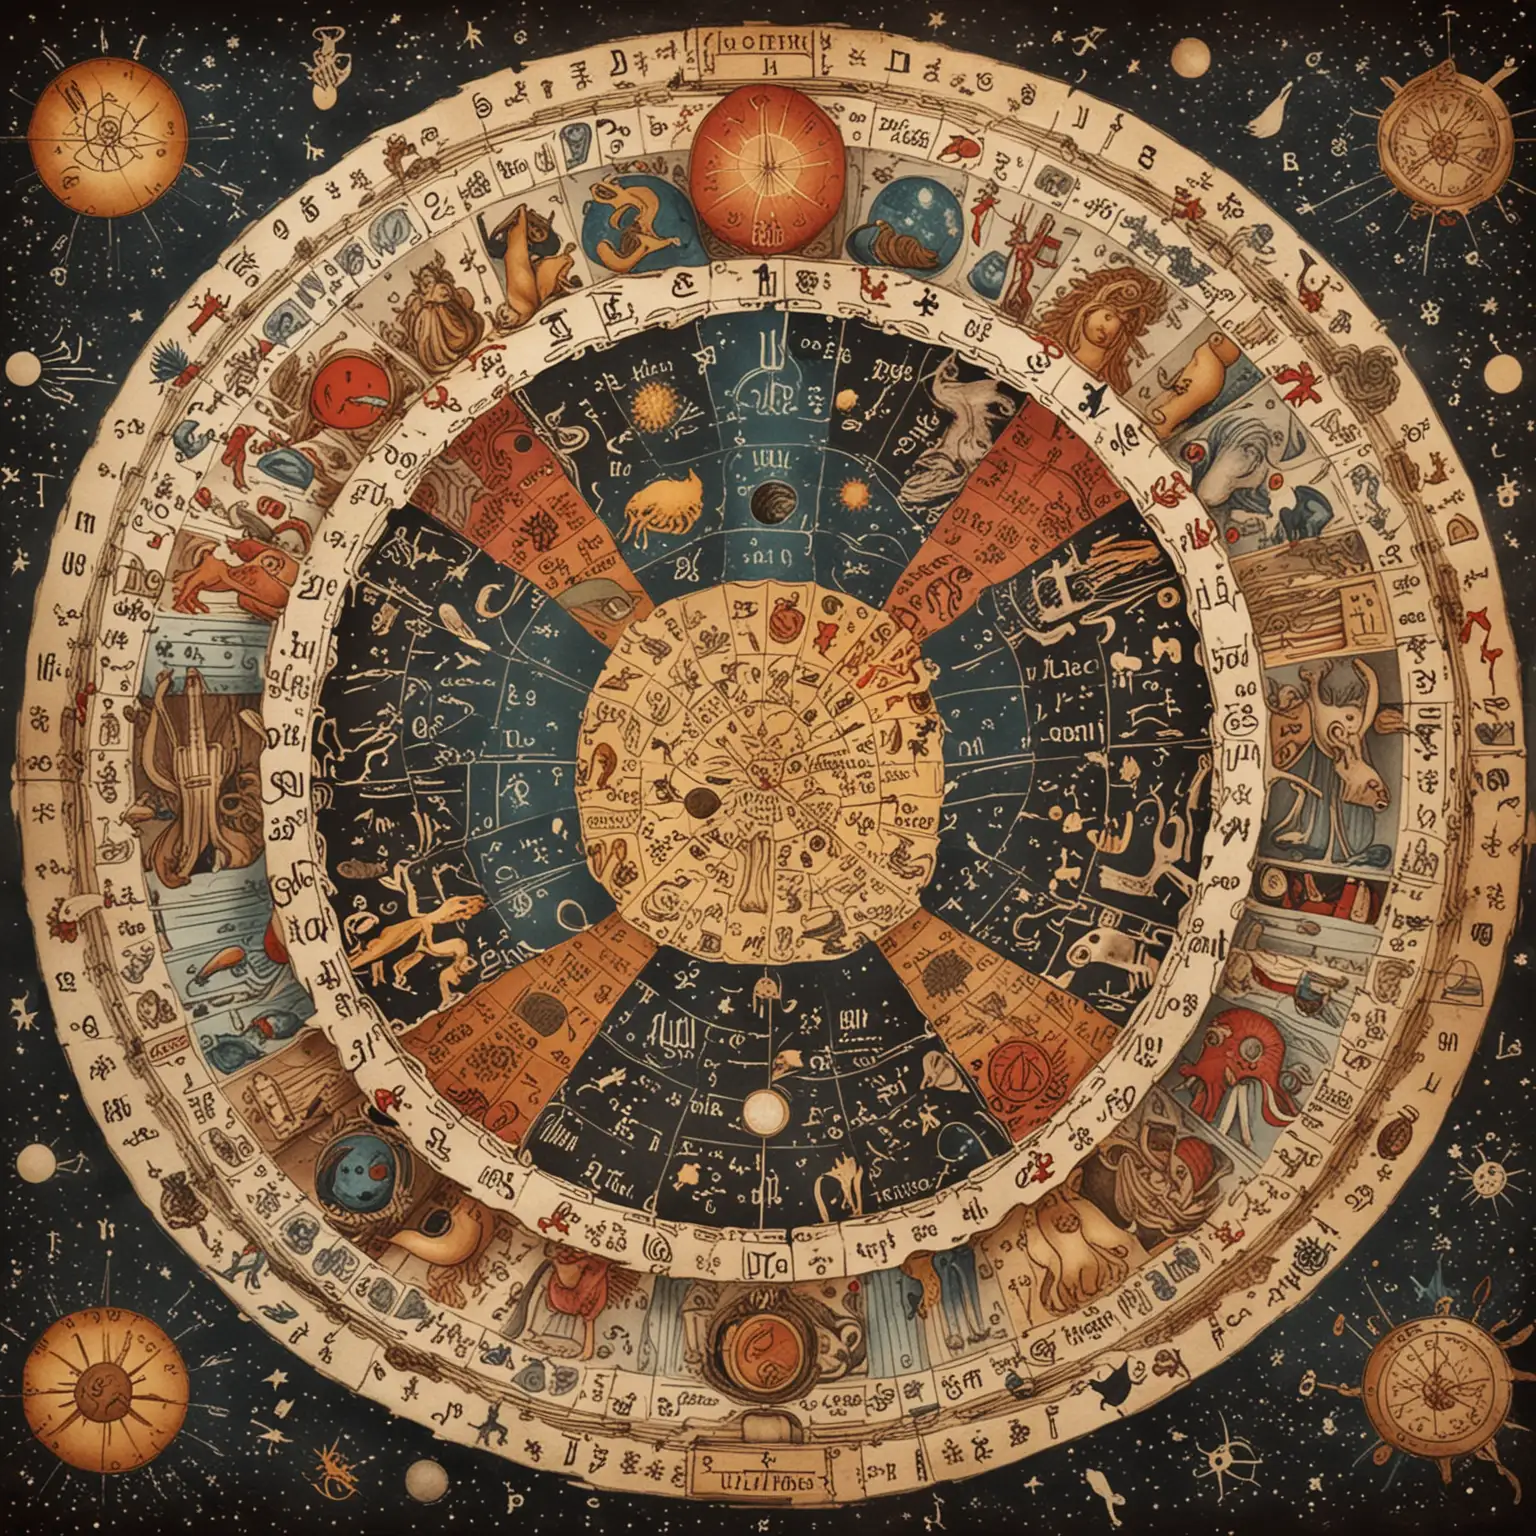 cosmic occult wheel diagram showing twelve points with all the signs of the zodiac